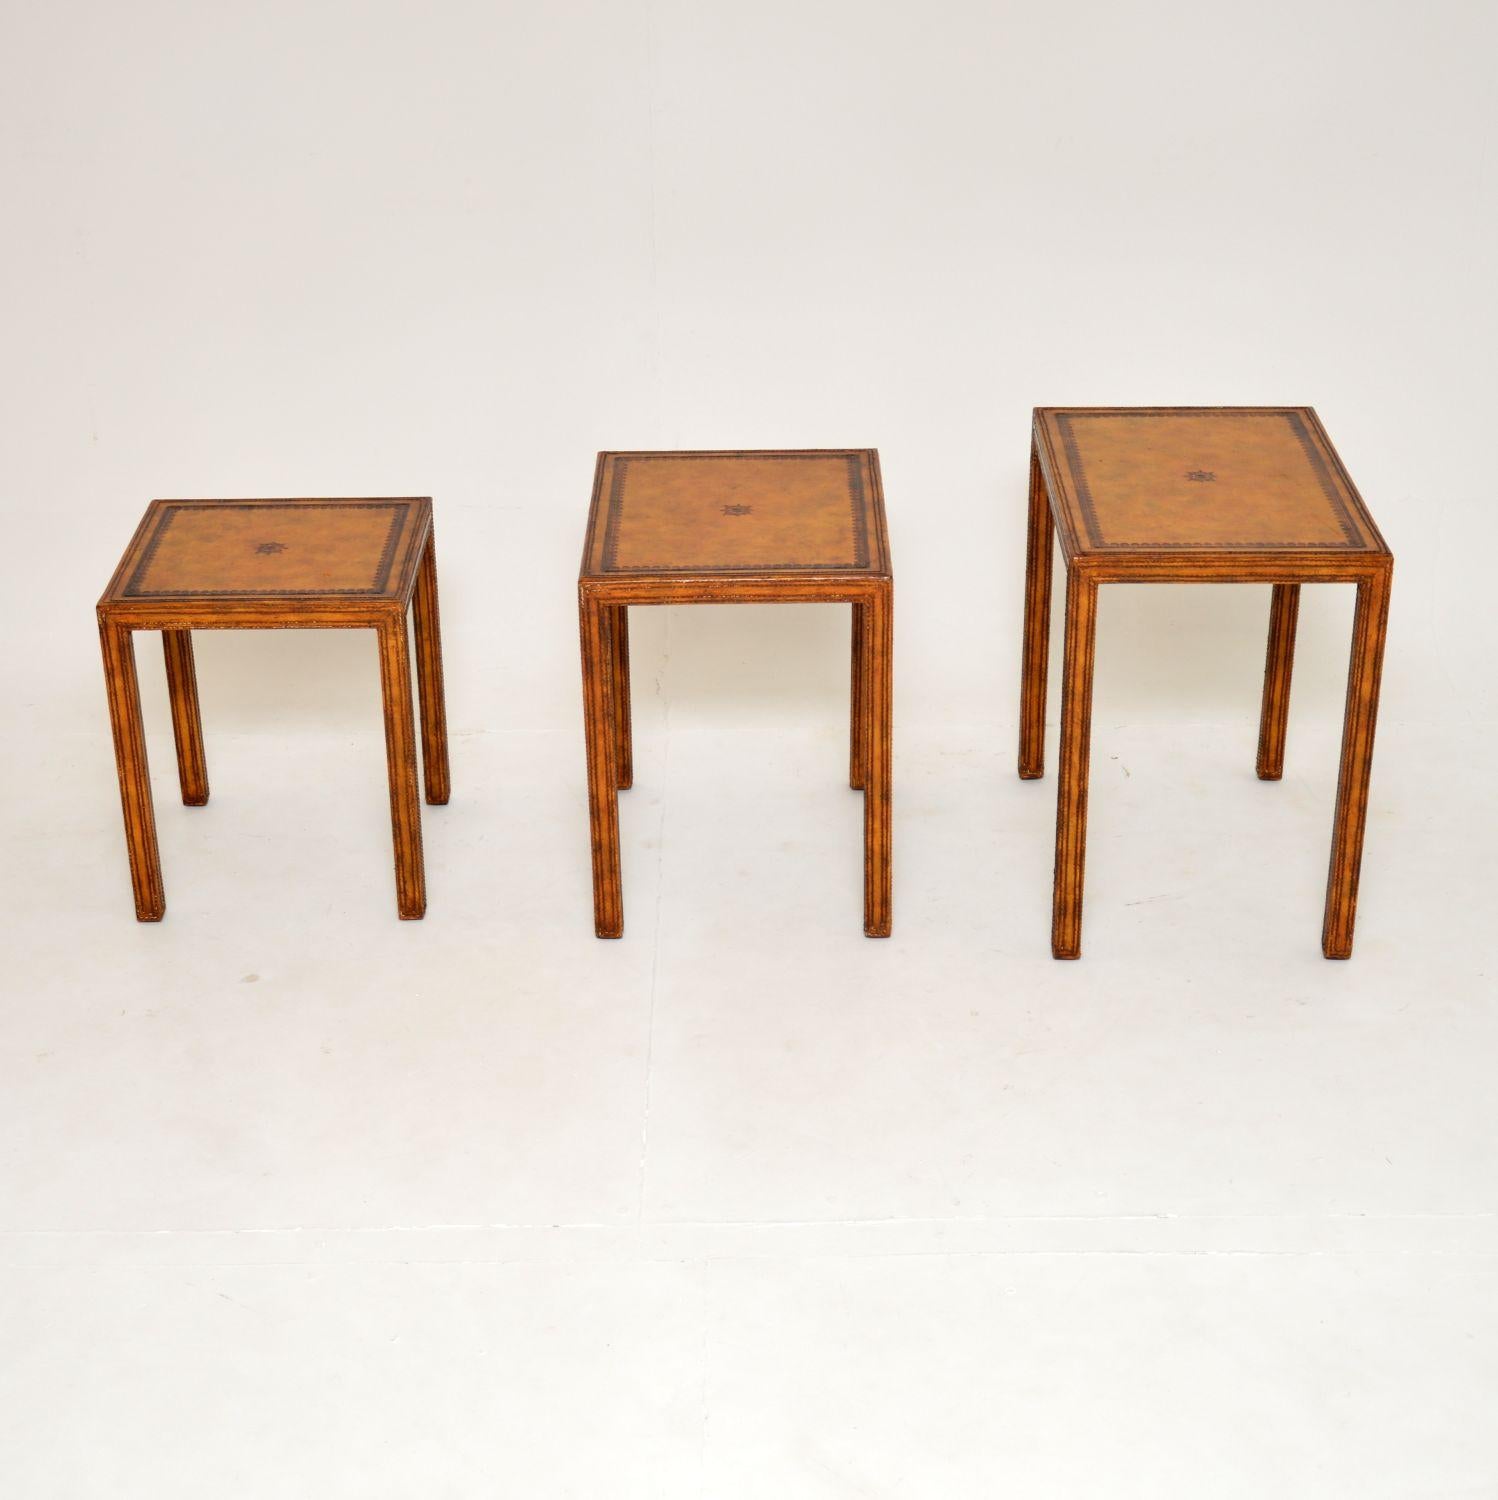 Neoclassical 1950's Vintage Leather Bound Nest of Tables For Sale